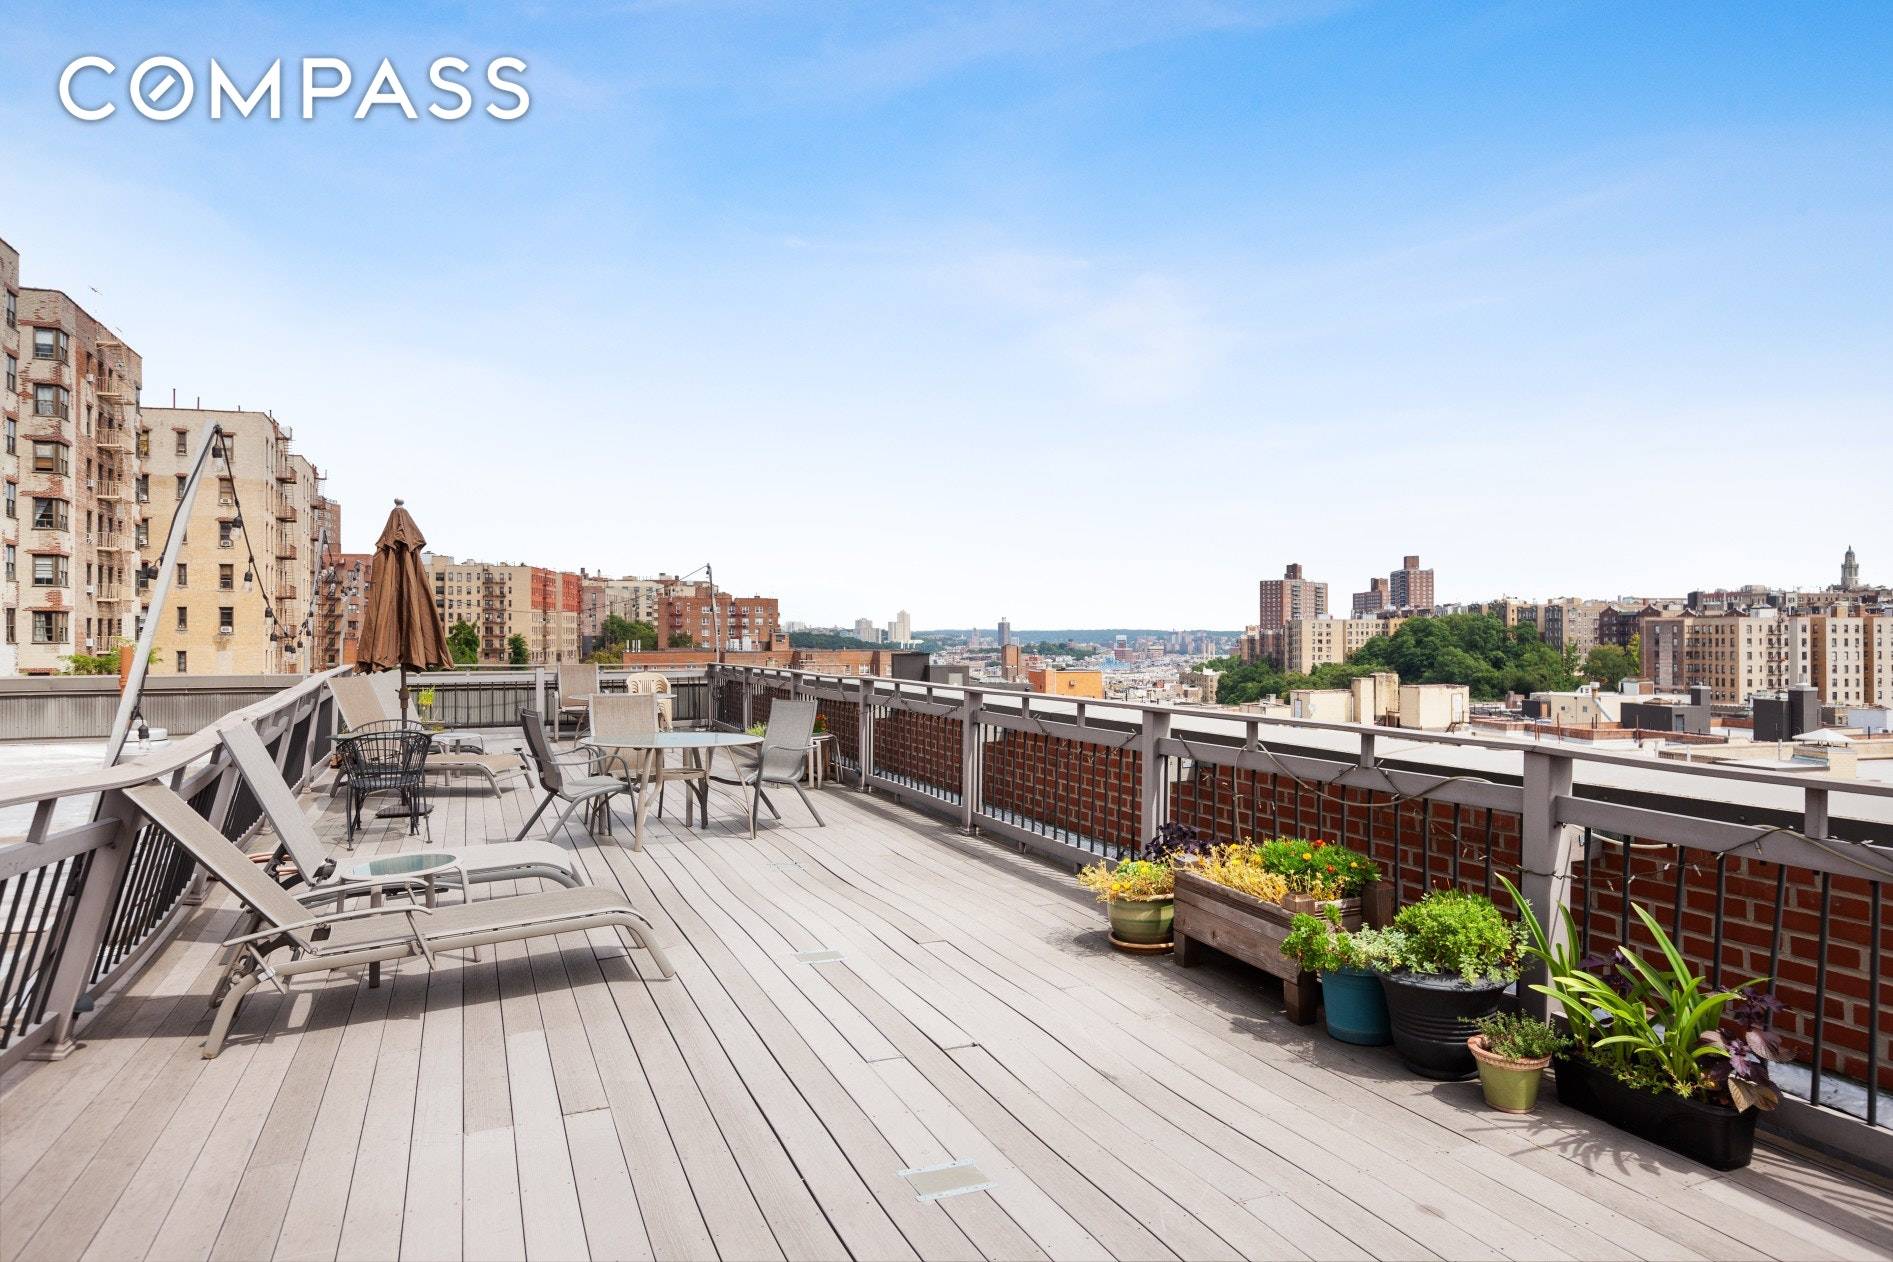 NEW PRICE ! Apt 5H is back on the market tastefully renovated !